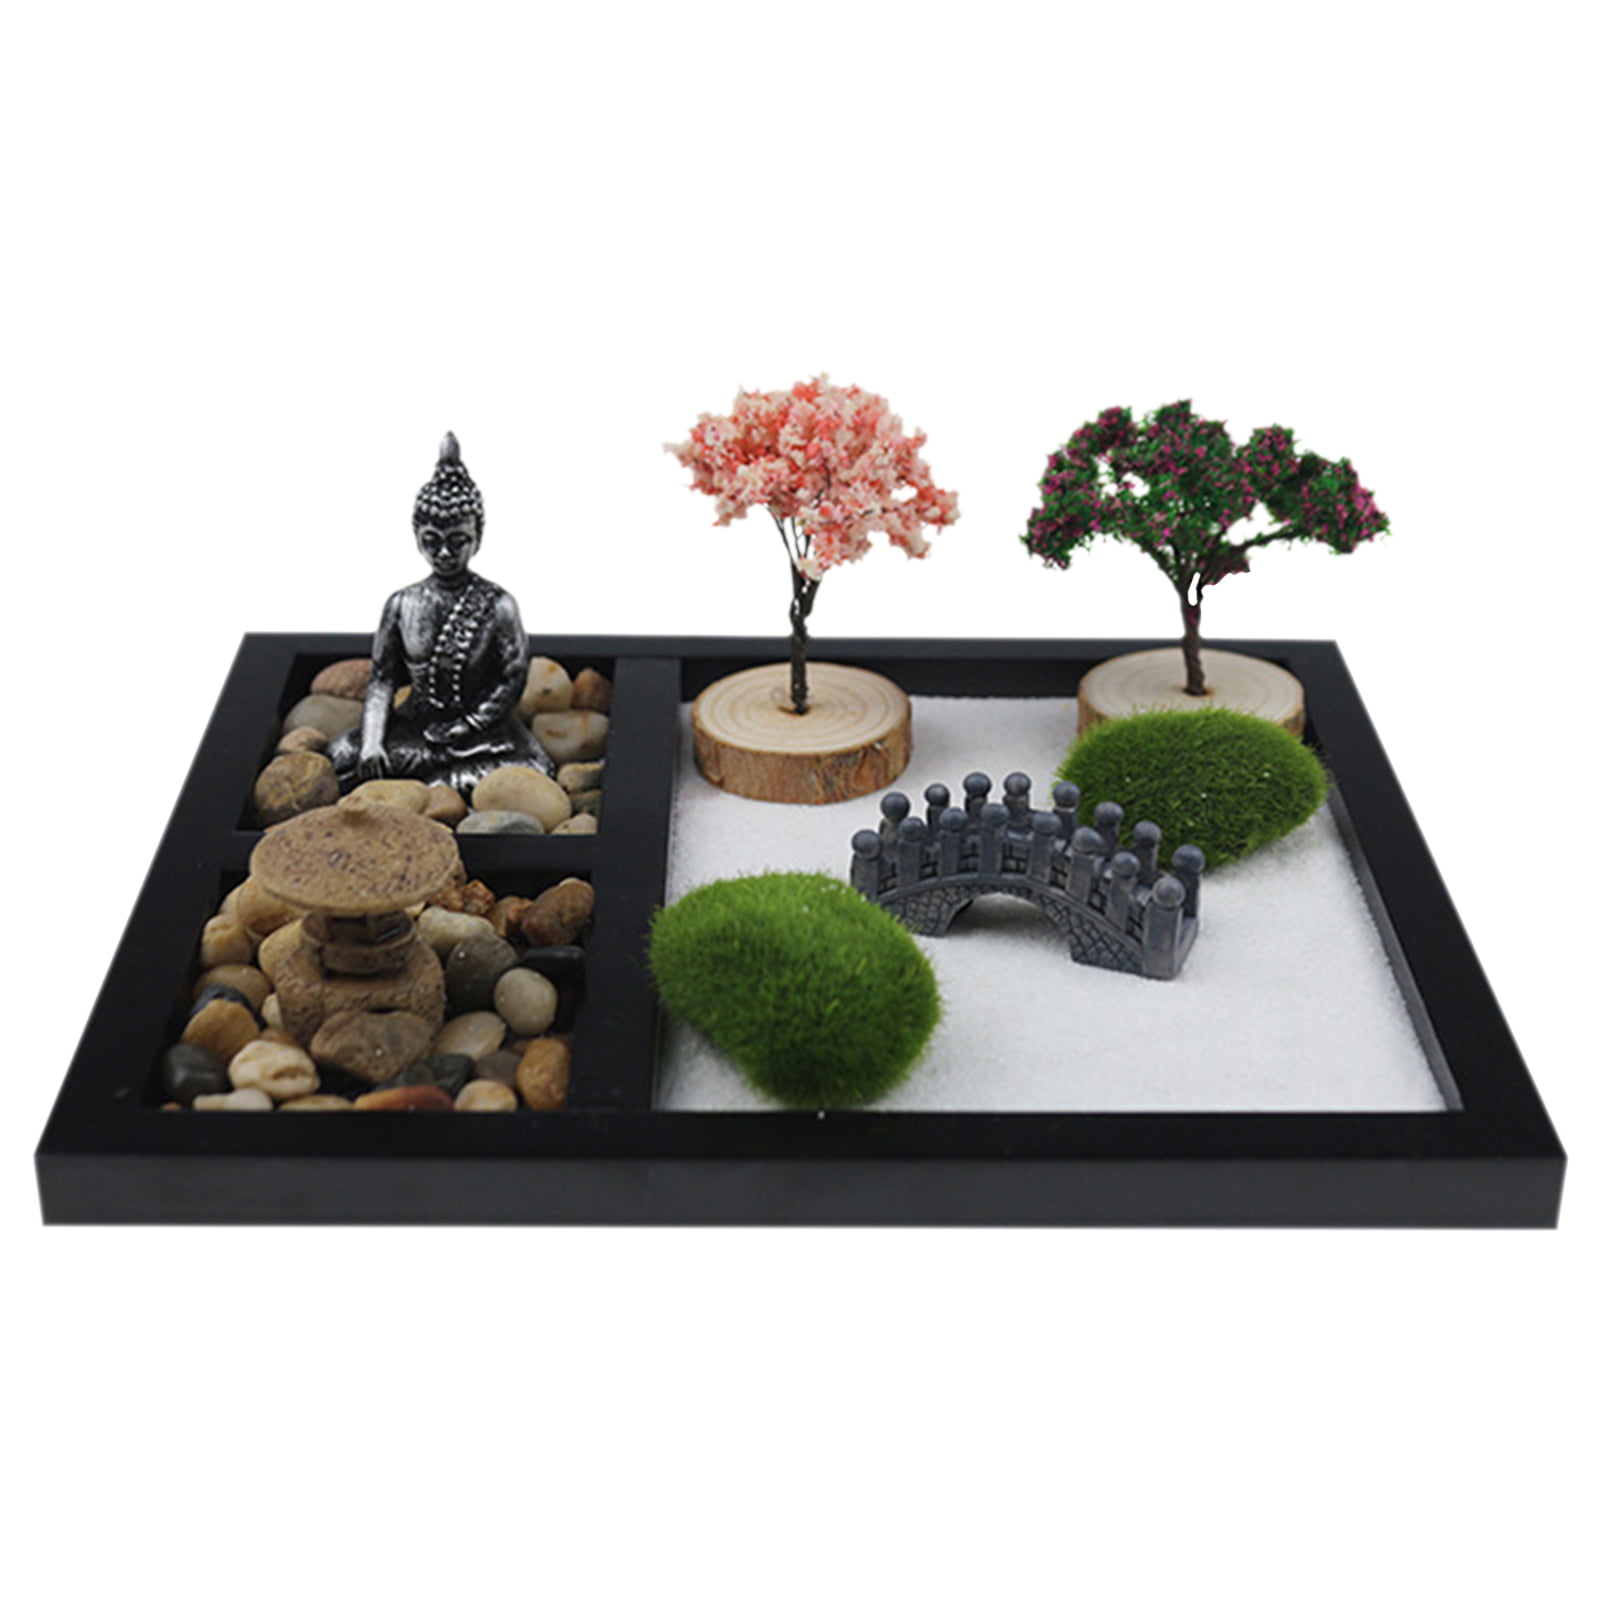 Details about   Incense Burner Buddha Statue Sand Tray Kit Home Outdoors And Indoor Ornament New 